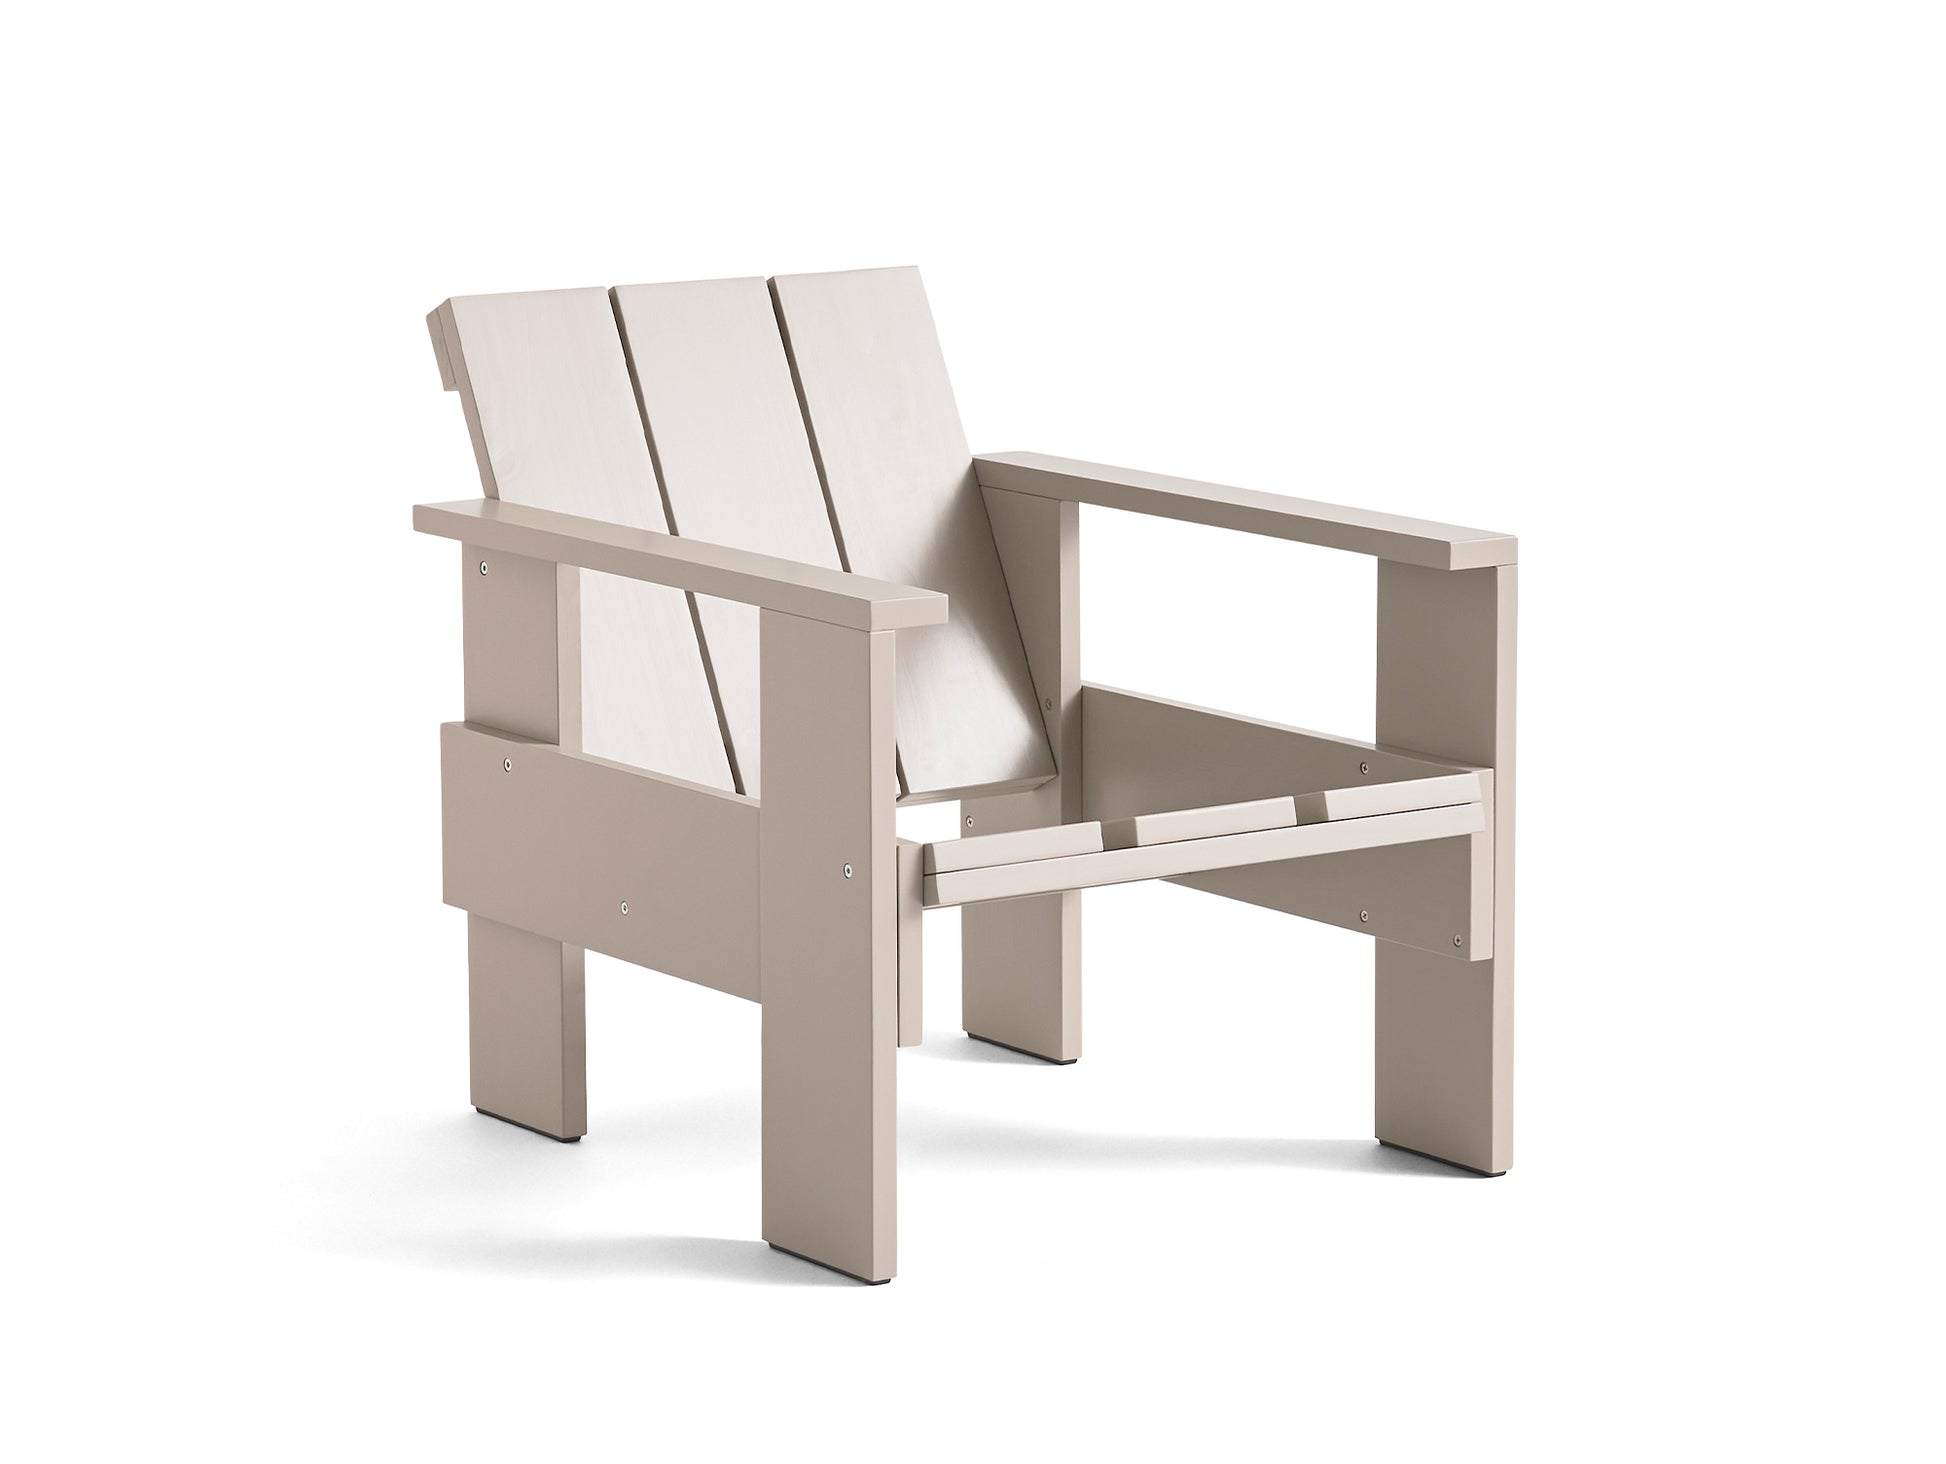 Crate Lounge Chair by HAY - London Fog